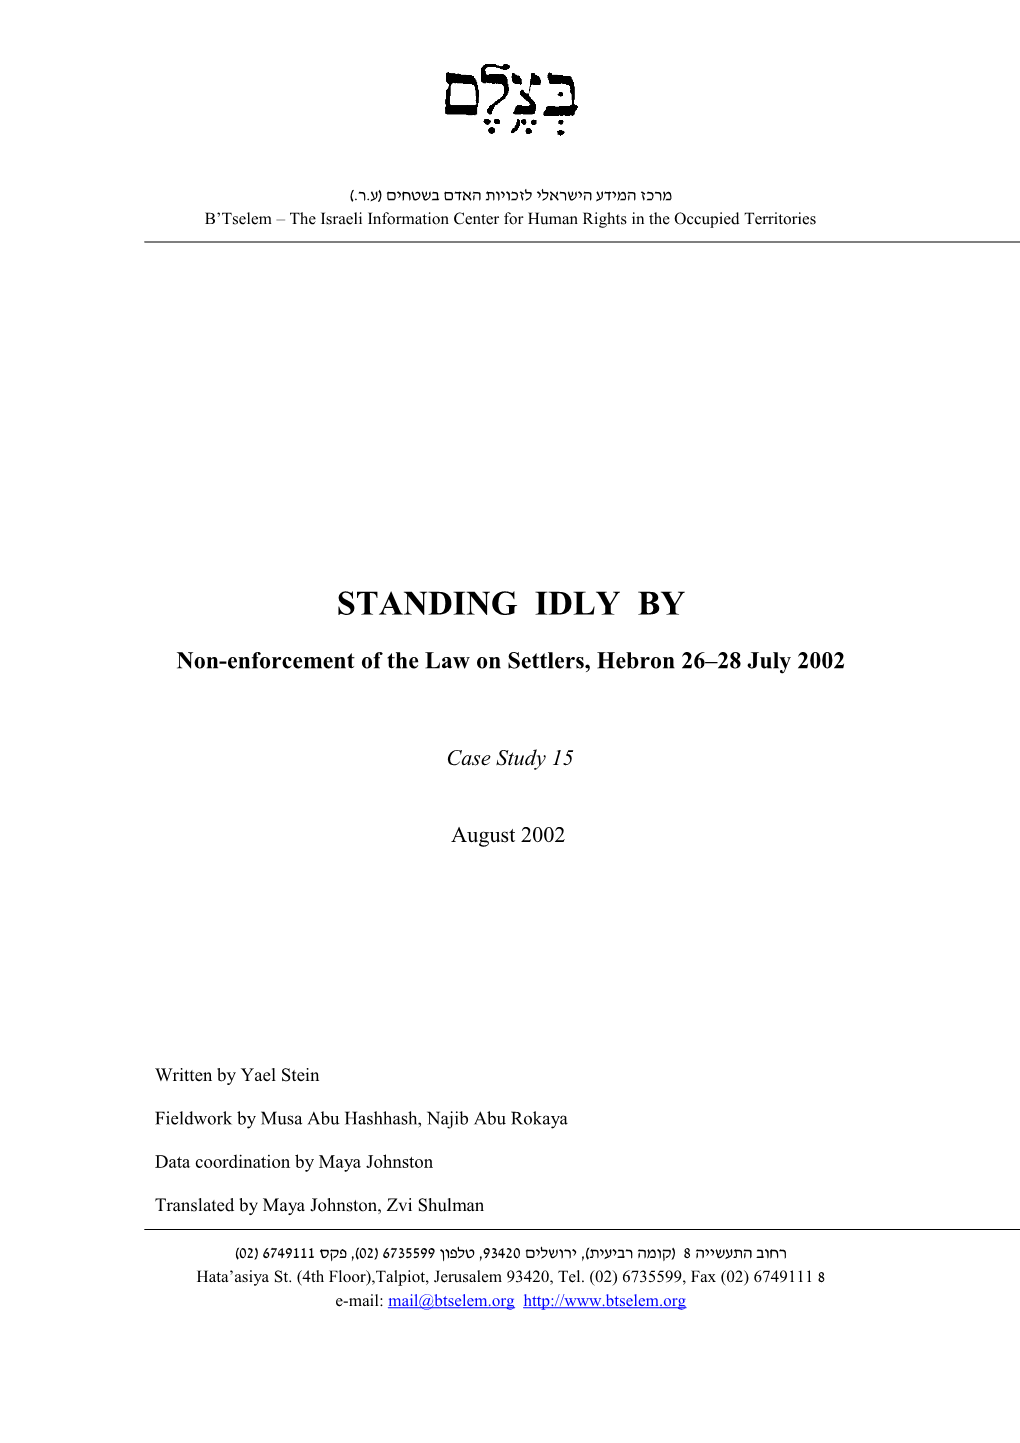 B'tselem: Standing Idly By: Non-Enforcement of the Law on Settlers, Hebron 26 28 July 2002